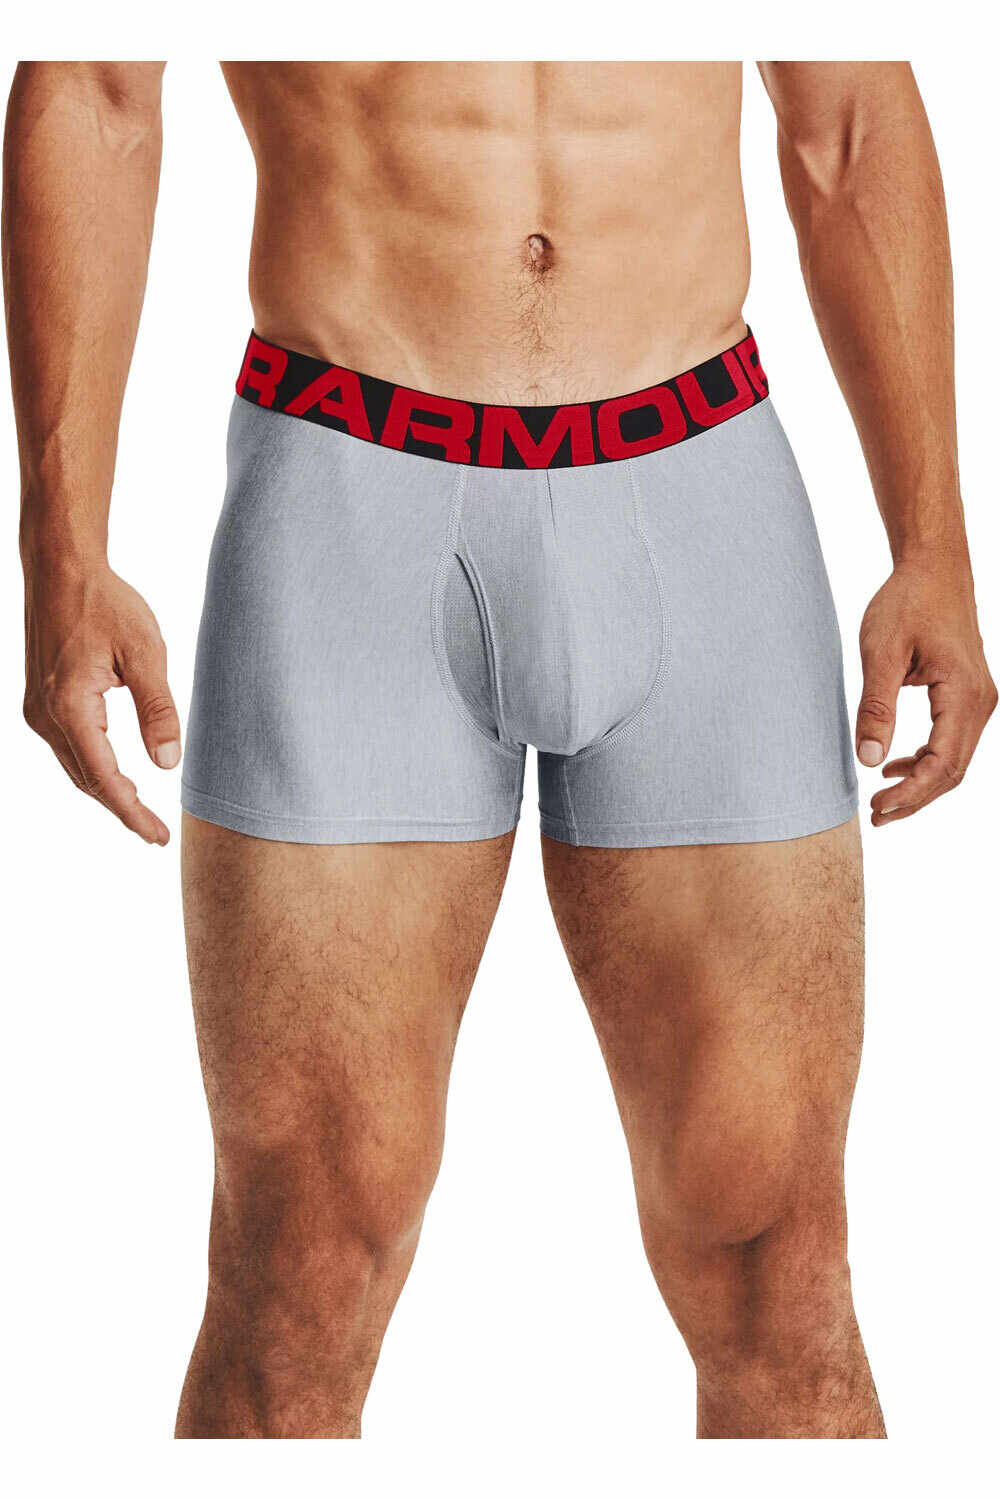 Under Armour boxer UA Tech 3in 2 Pack vista frontal